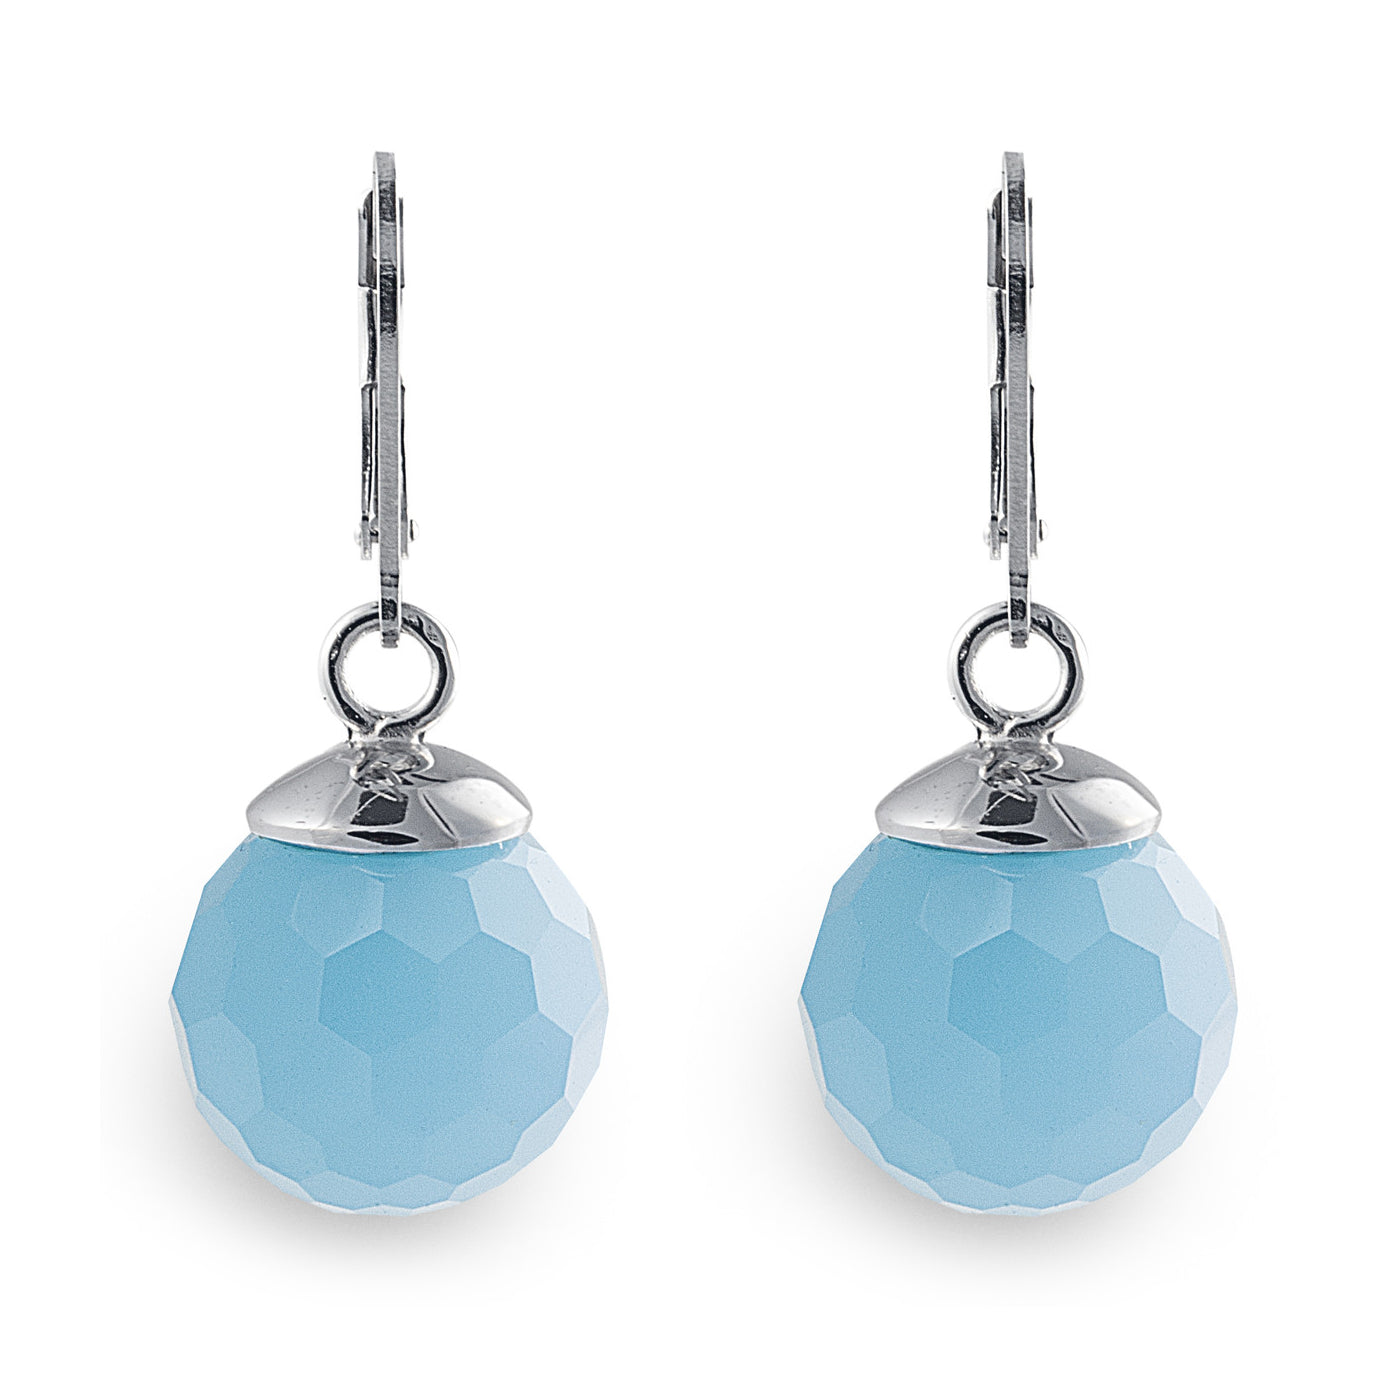 The Sky Blue Lopez Drop Earrings are made of 925 sterling silver and feature facet-cut blue obsidian with European ear hooks. Simple elegance suitable for everyday wear. More colours and matching rings are available. Jewellery by Bellagio & Co. Worldwide Shipping. Free shipping for orders over $150.00 within Australia.